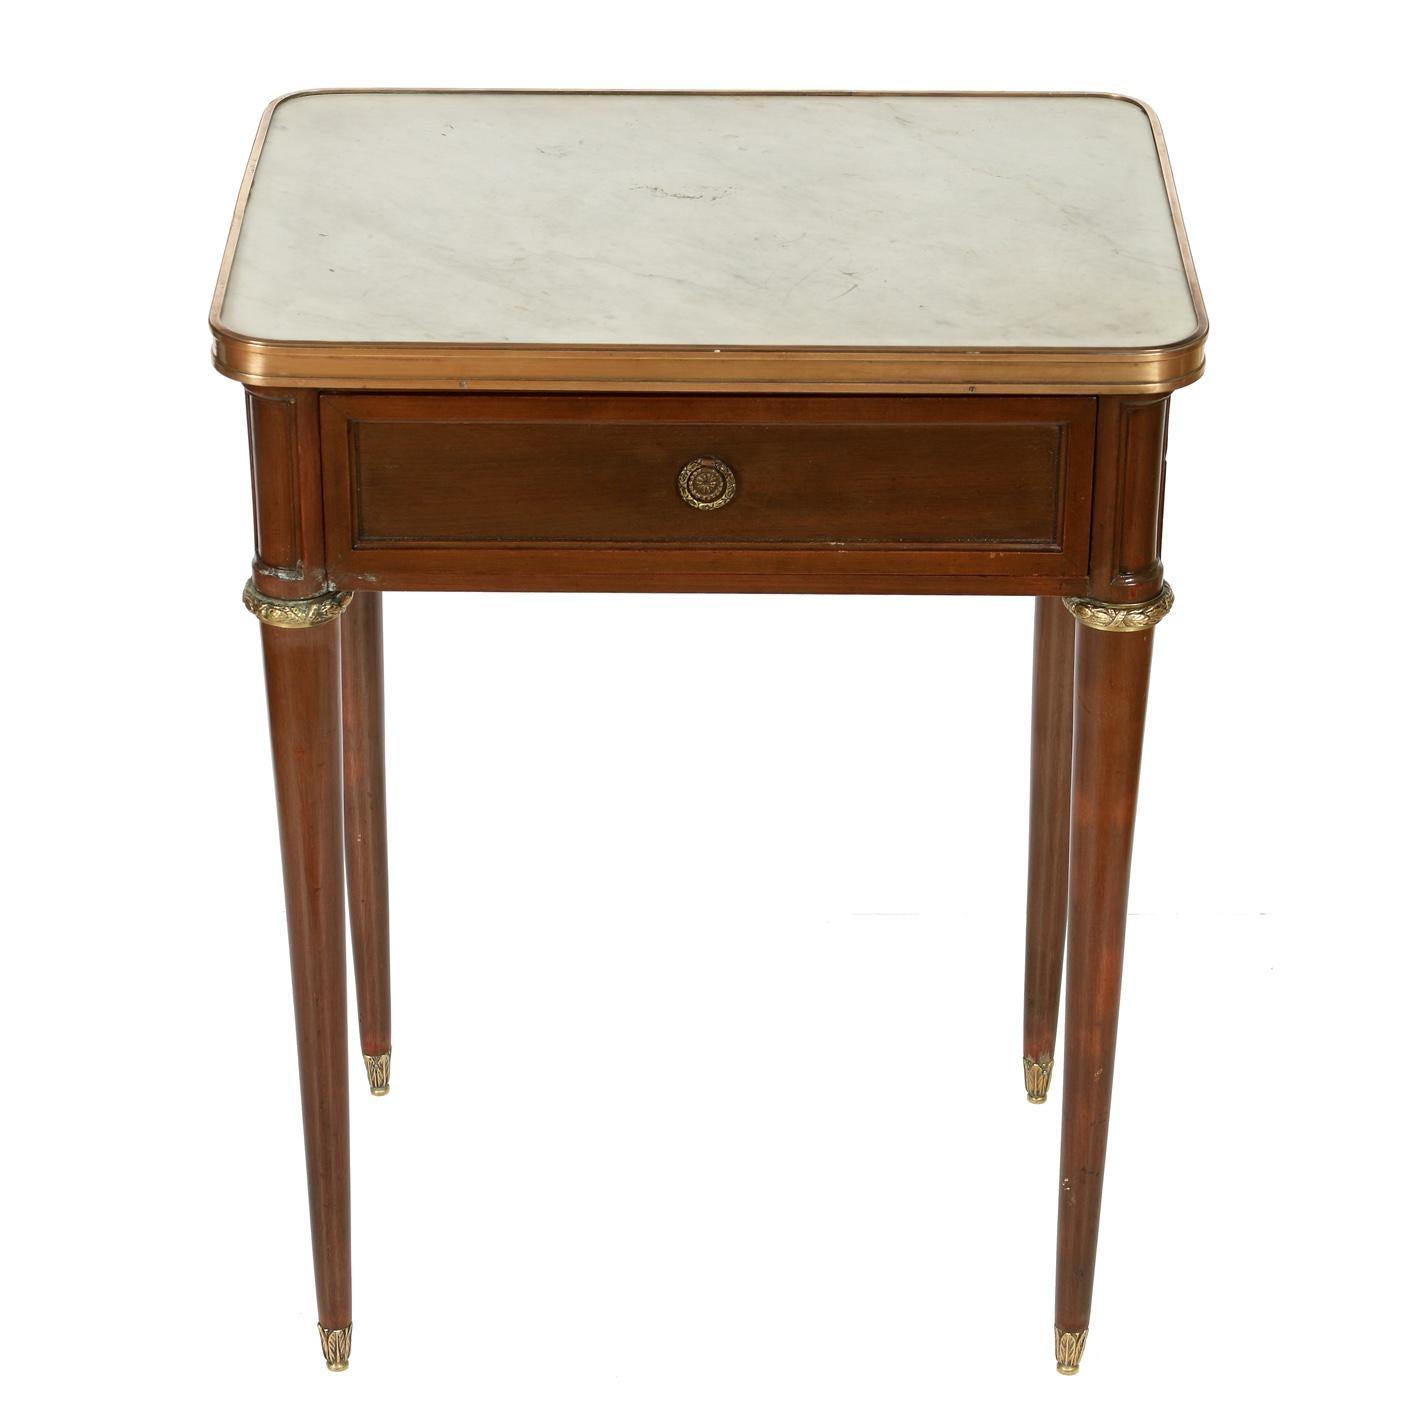 20th Century Pair of Mahogany Marble Top Nightstands with Brass Fittings